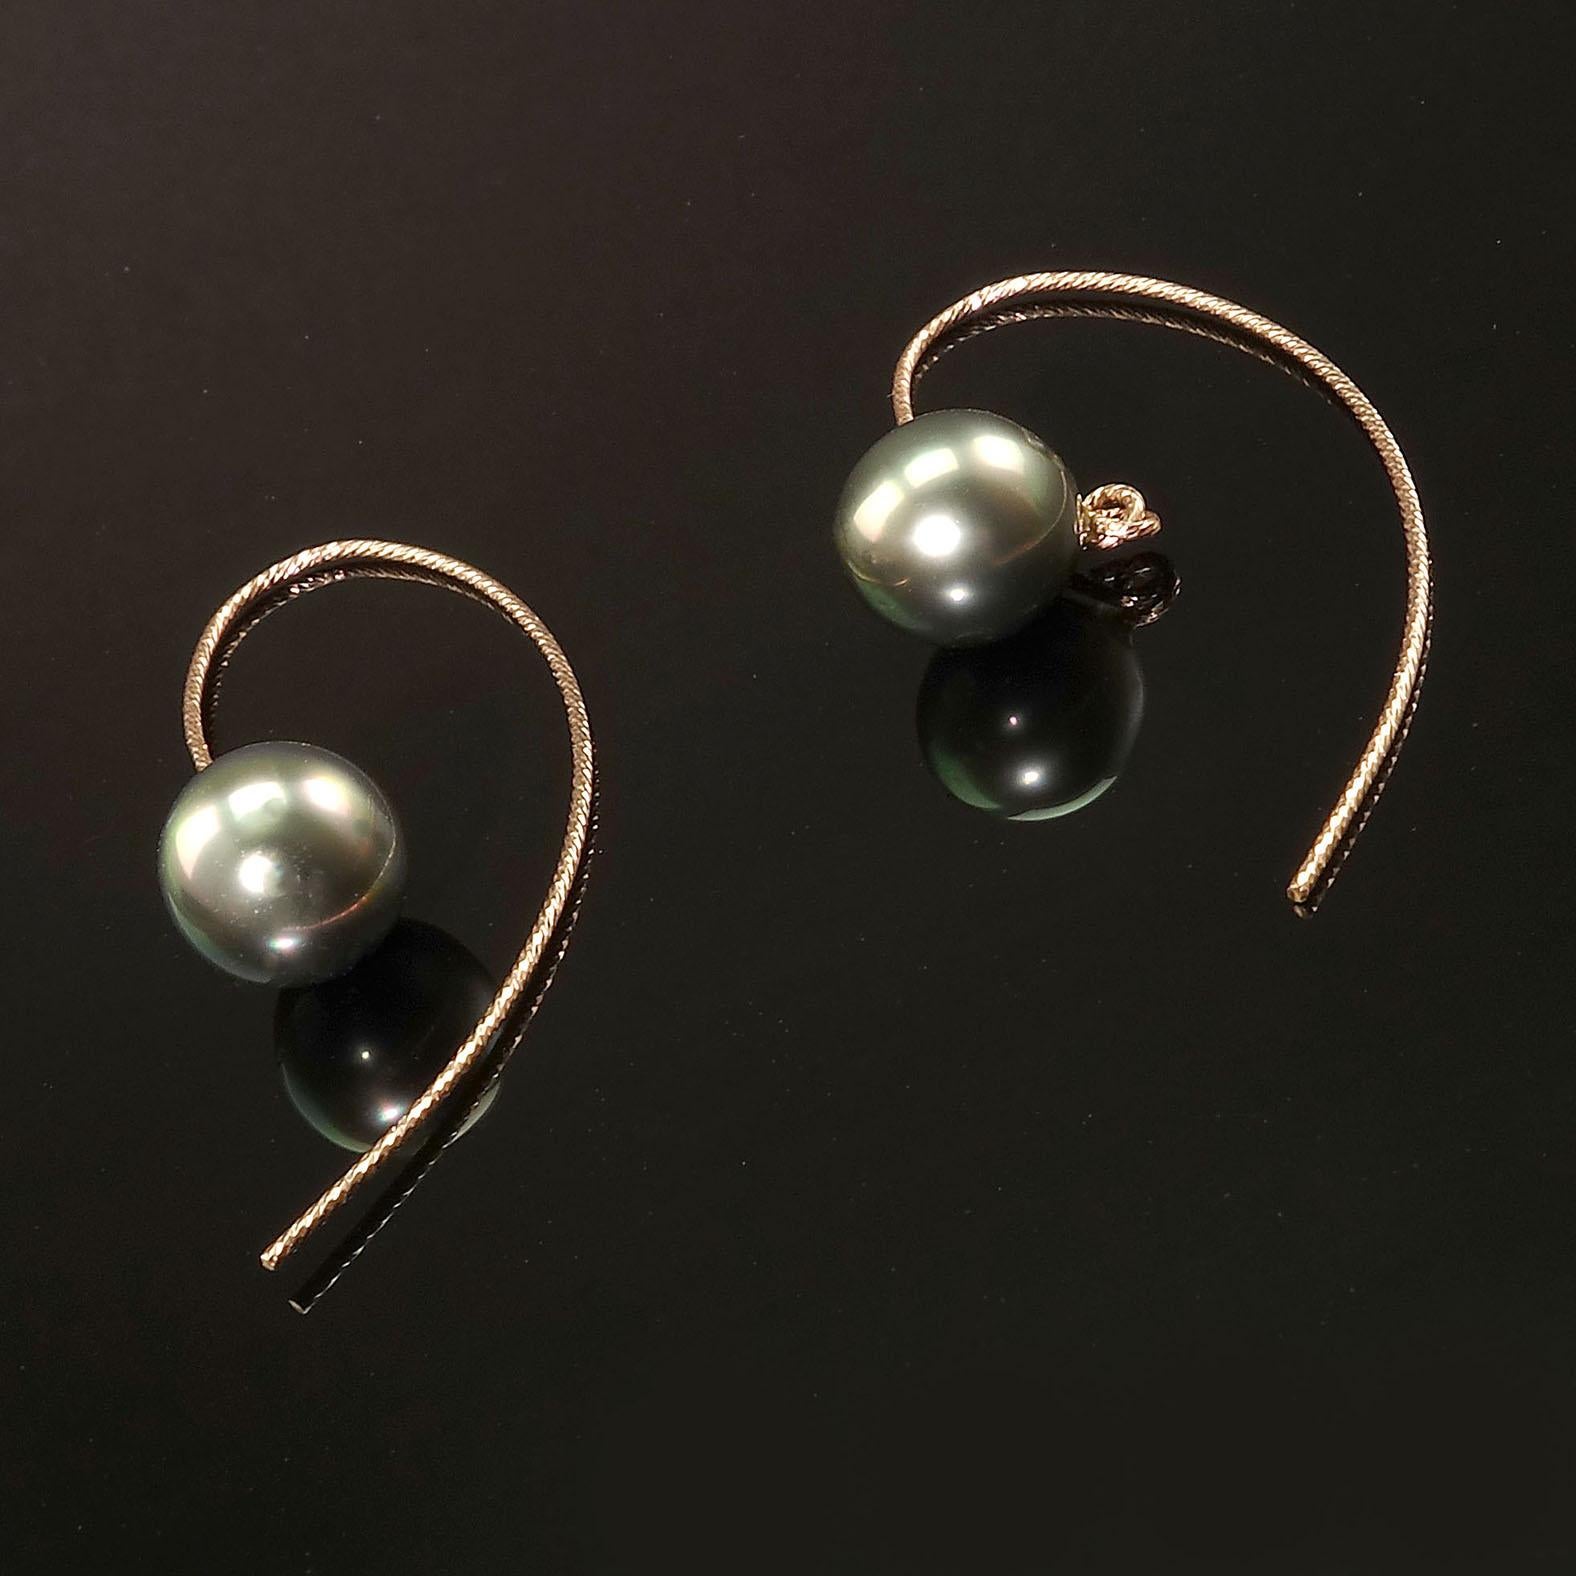 Elegant Earrings of Gray Round Pearls Dangling from Rose Sterling Silver hooks 1